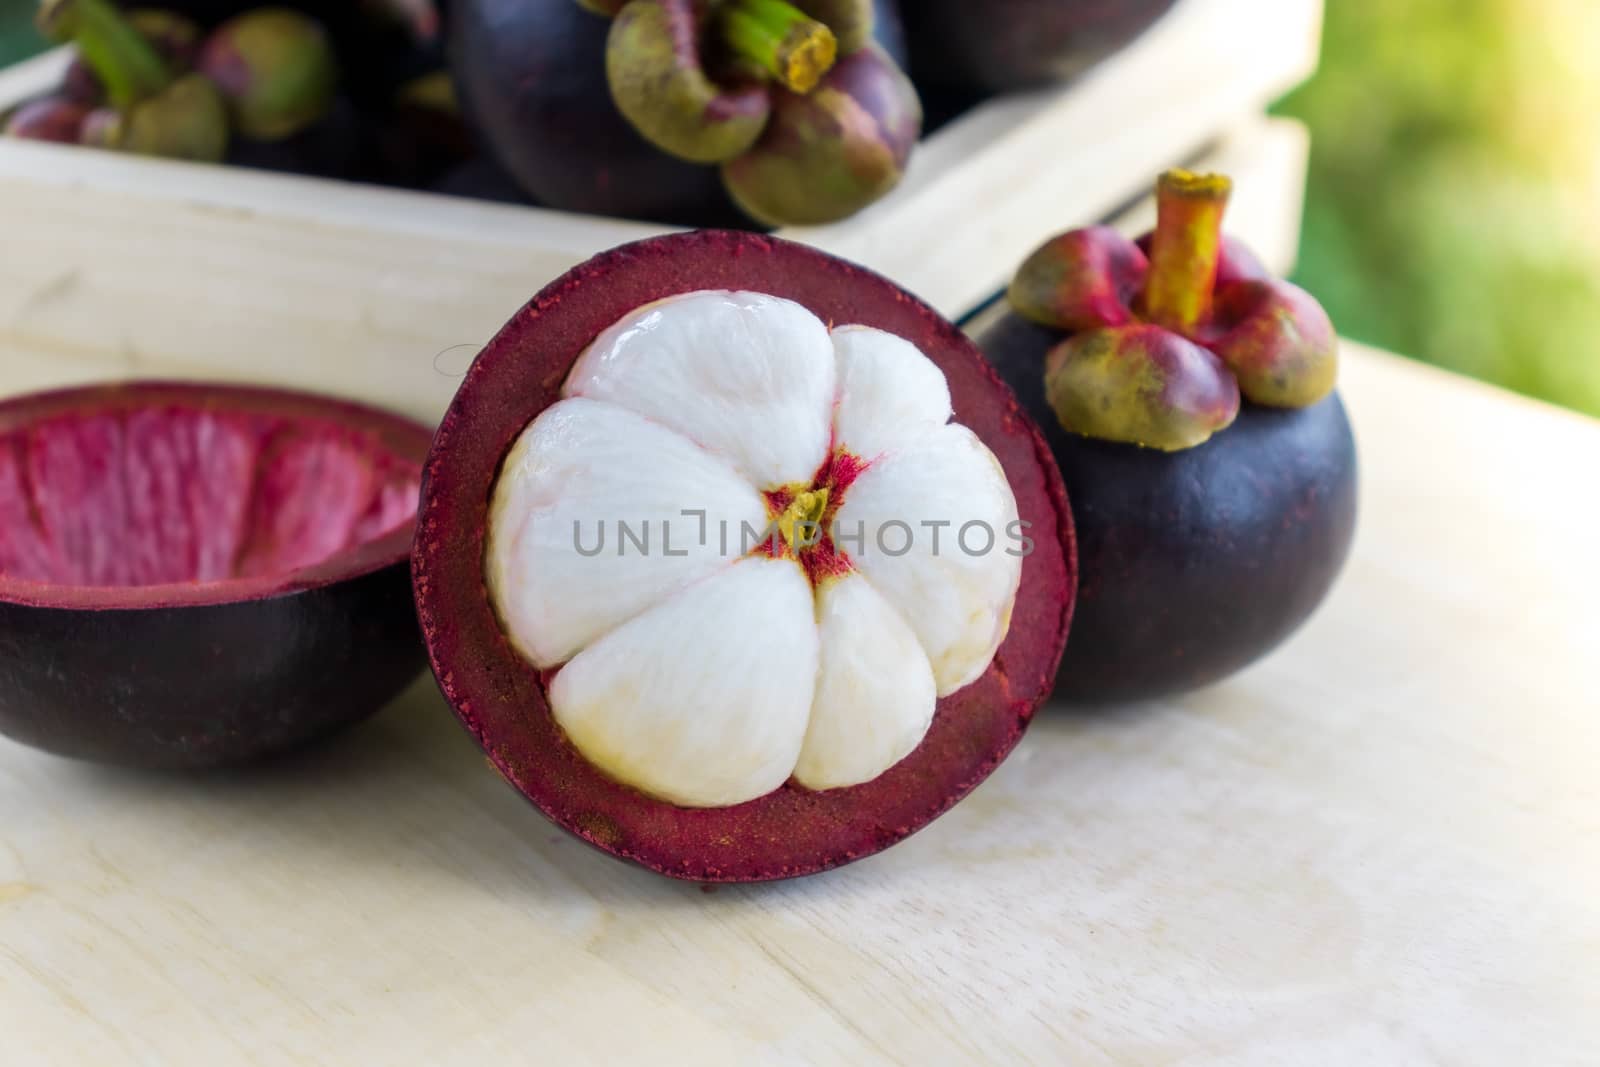 Mangosteen - The Queen of Tropical Fruit, dark-purple skin and creamy white fruit flash on wooden table